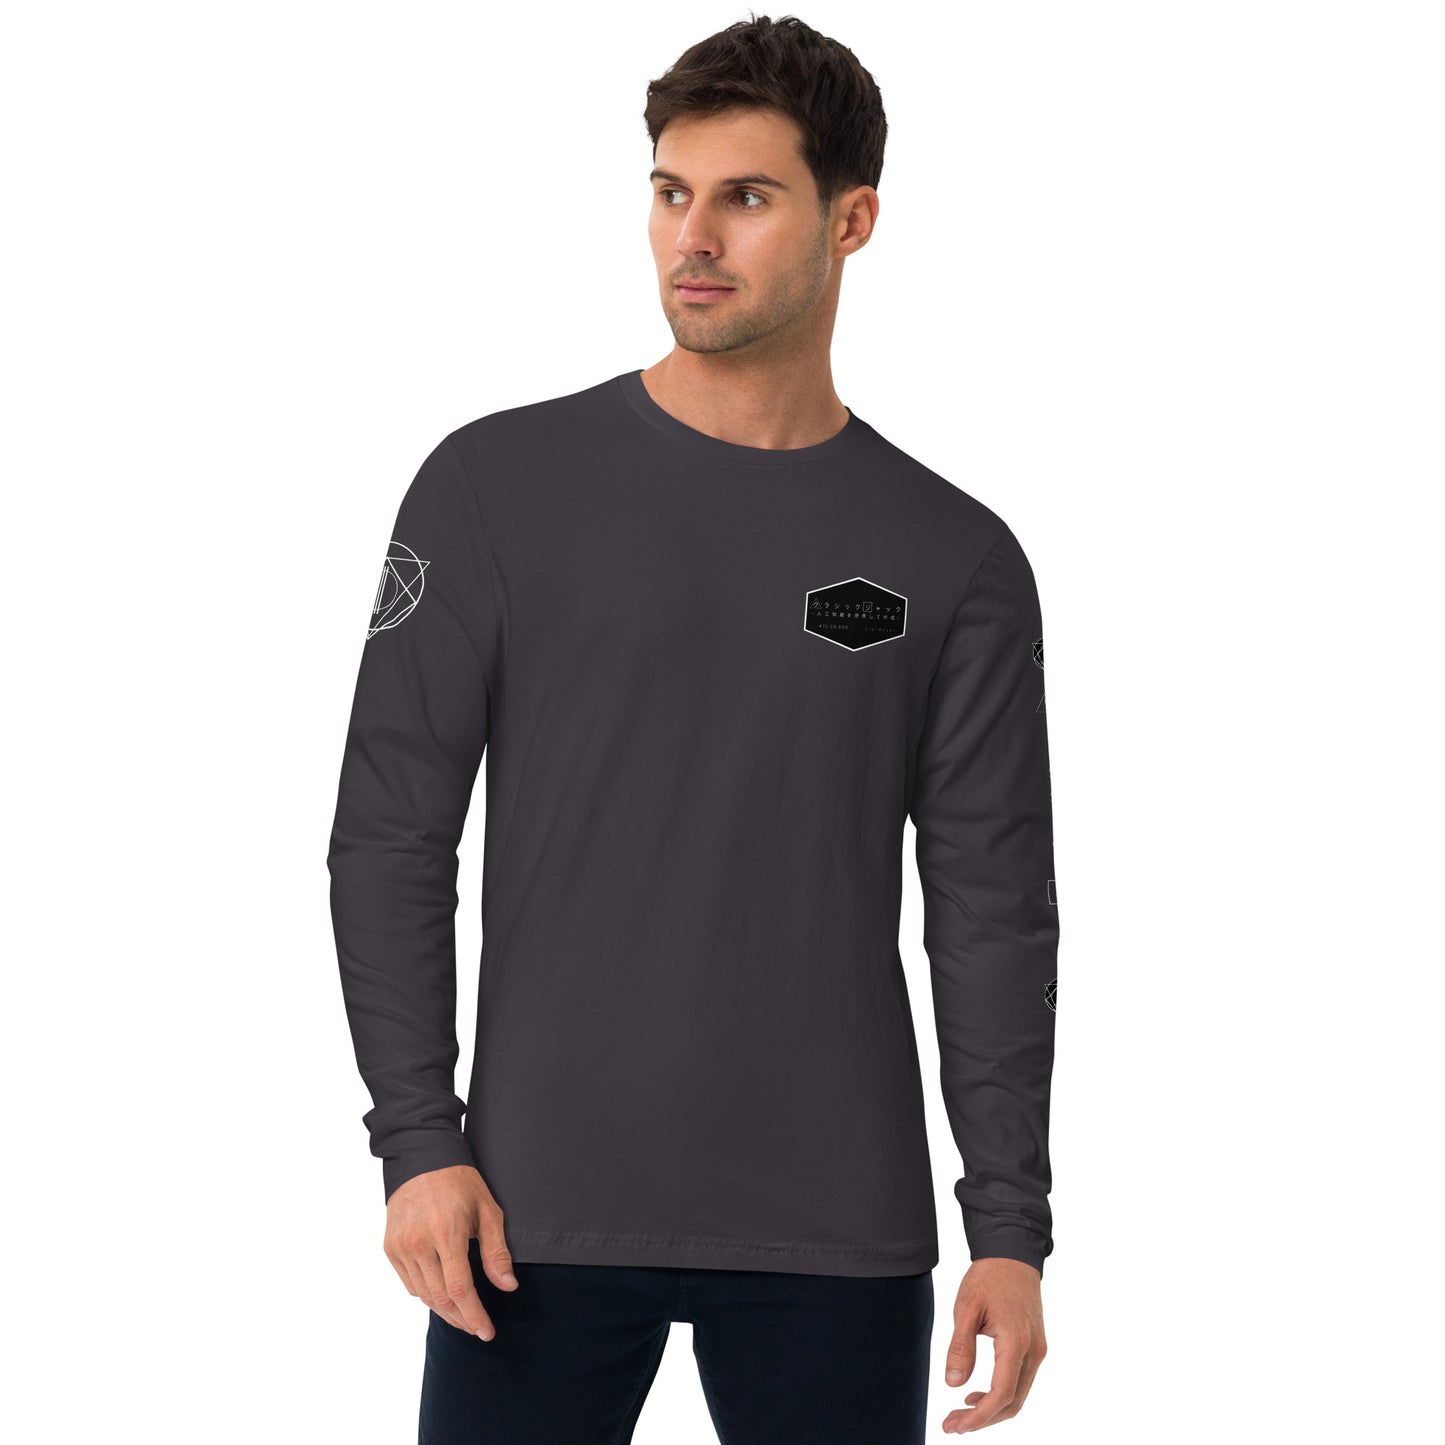 Now That I Have Your Attention - Long Sleeve Fitted Crew